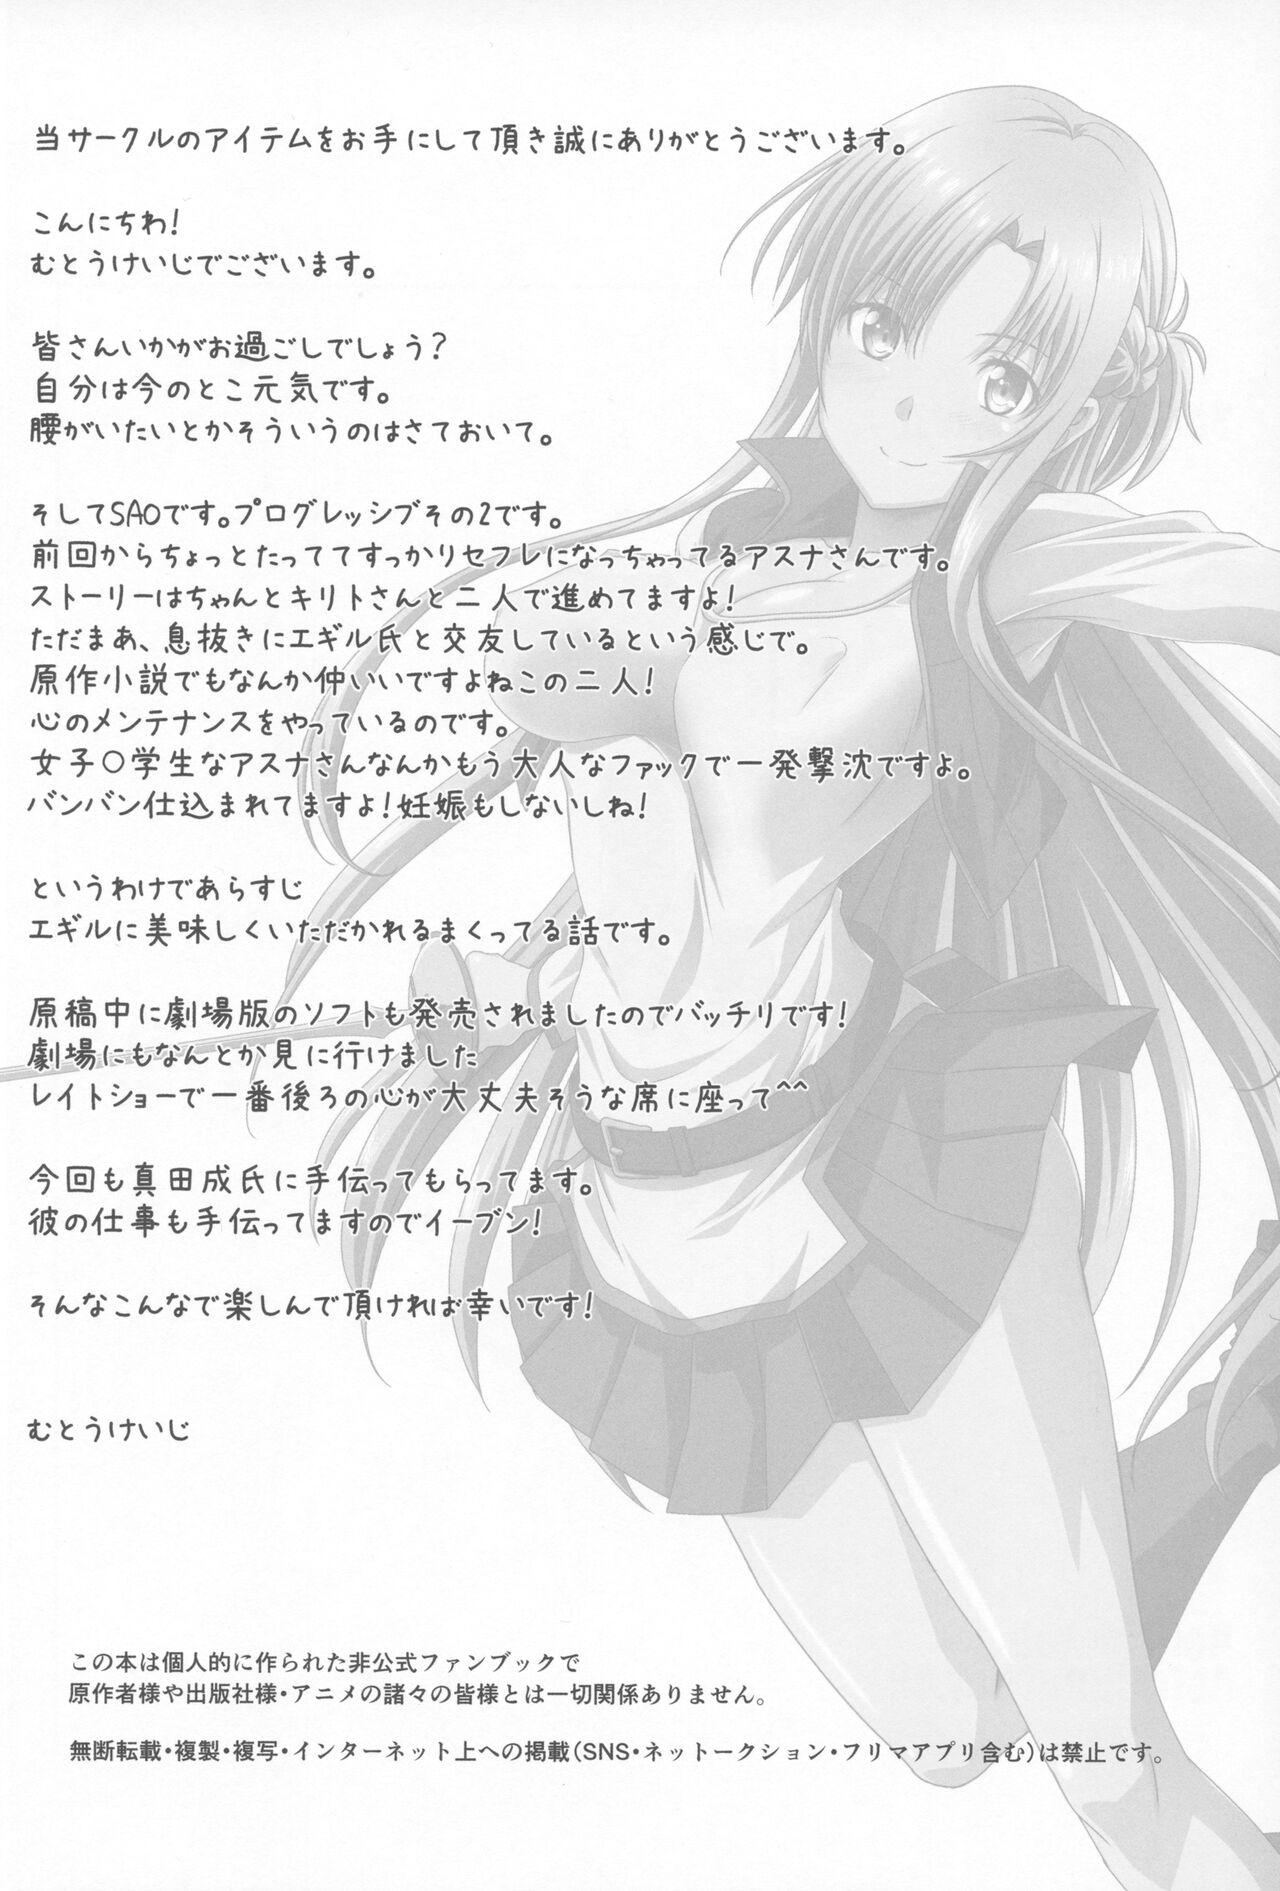 Vadia Astral Bout Ver. 45 - Sword art online Fetiche - Page 3